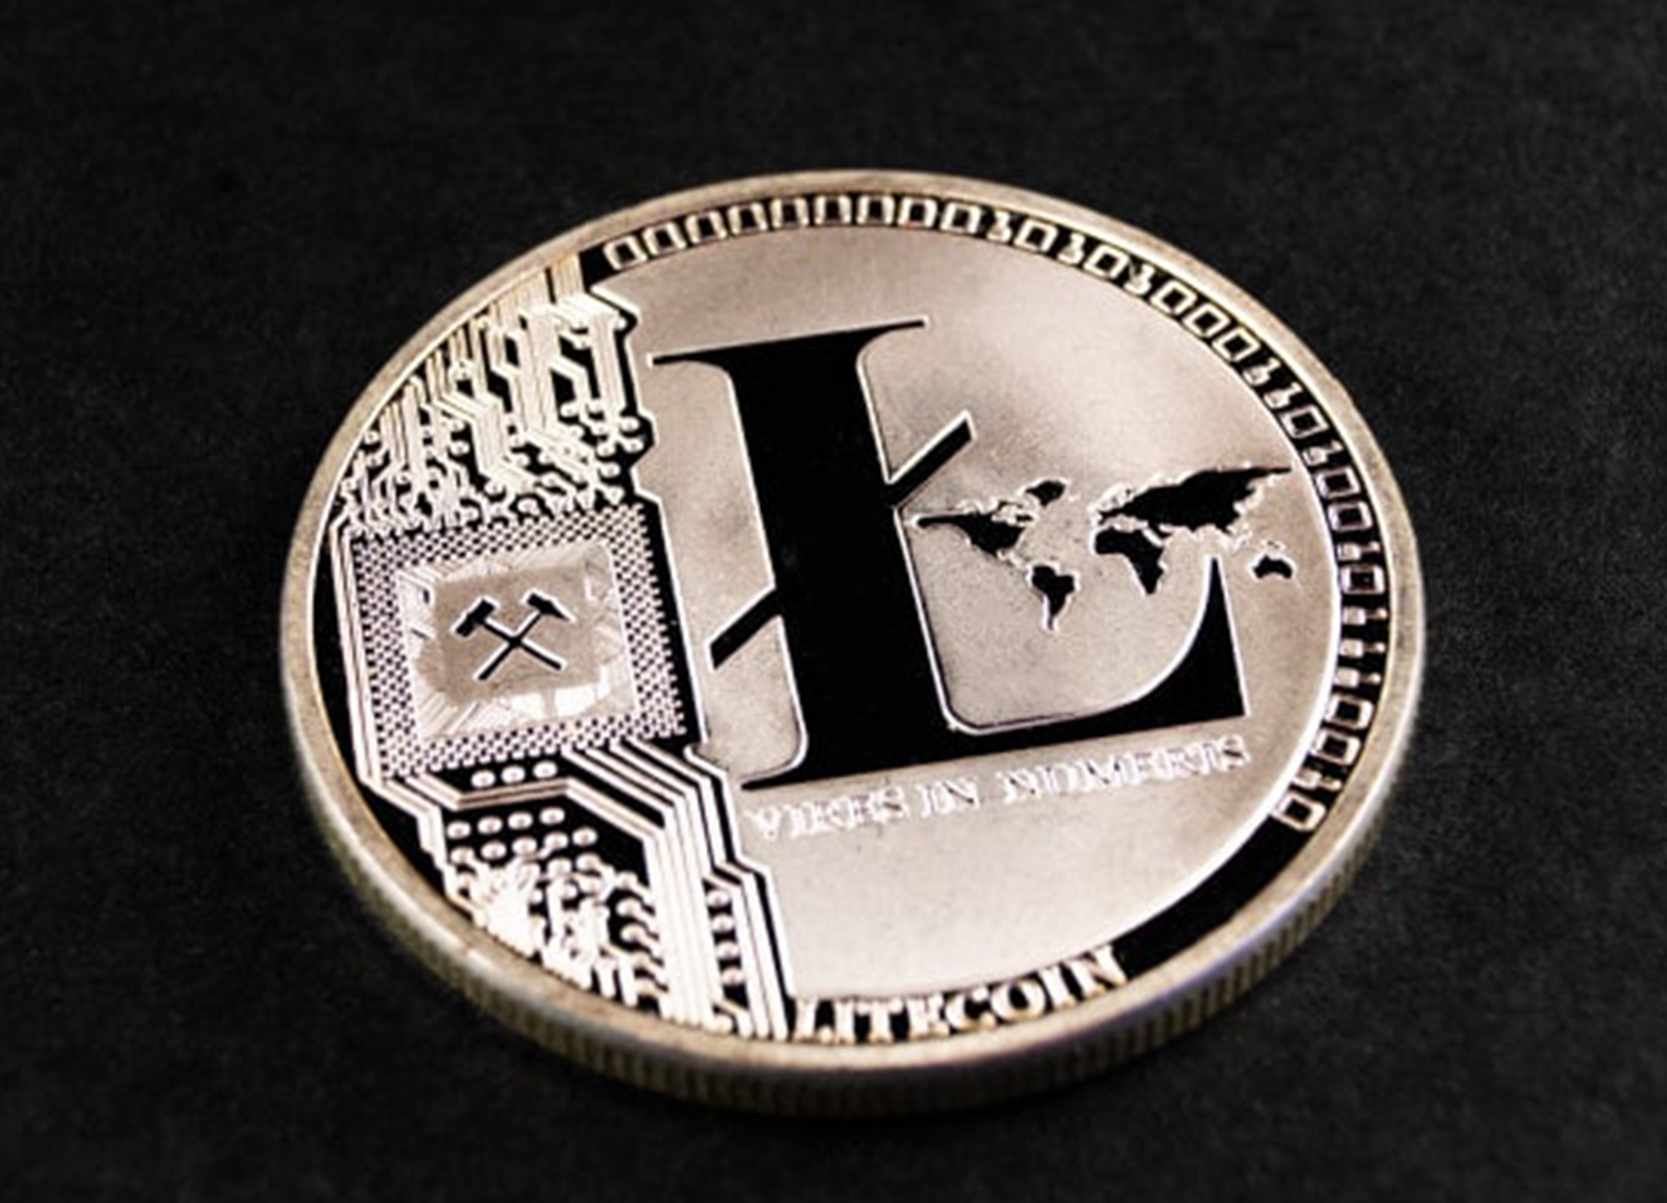  frequently asked questions (FAQ) about Litecoin